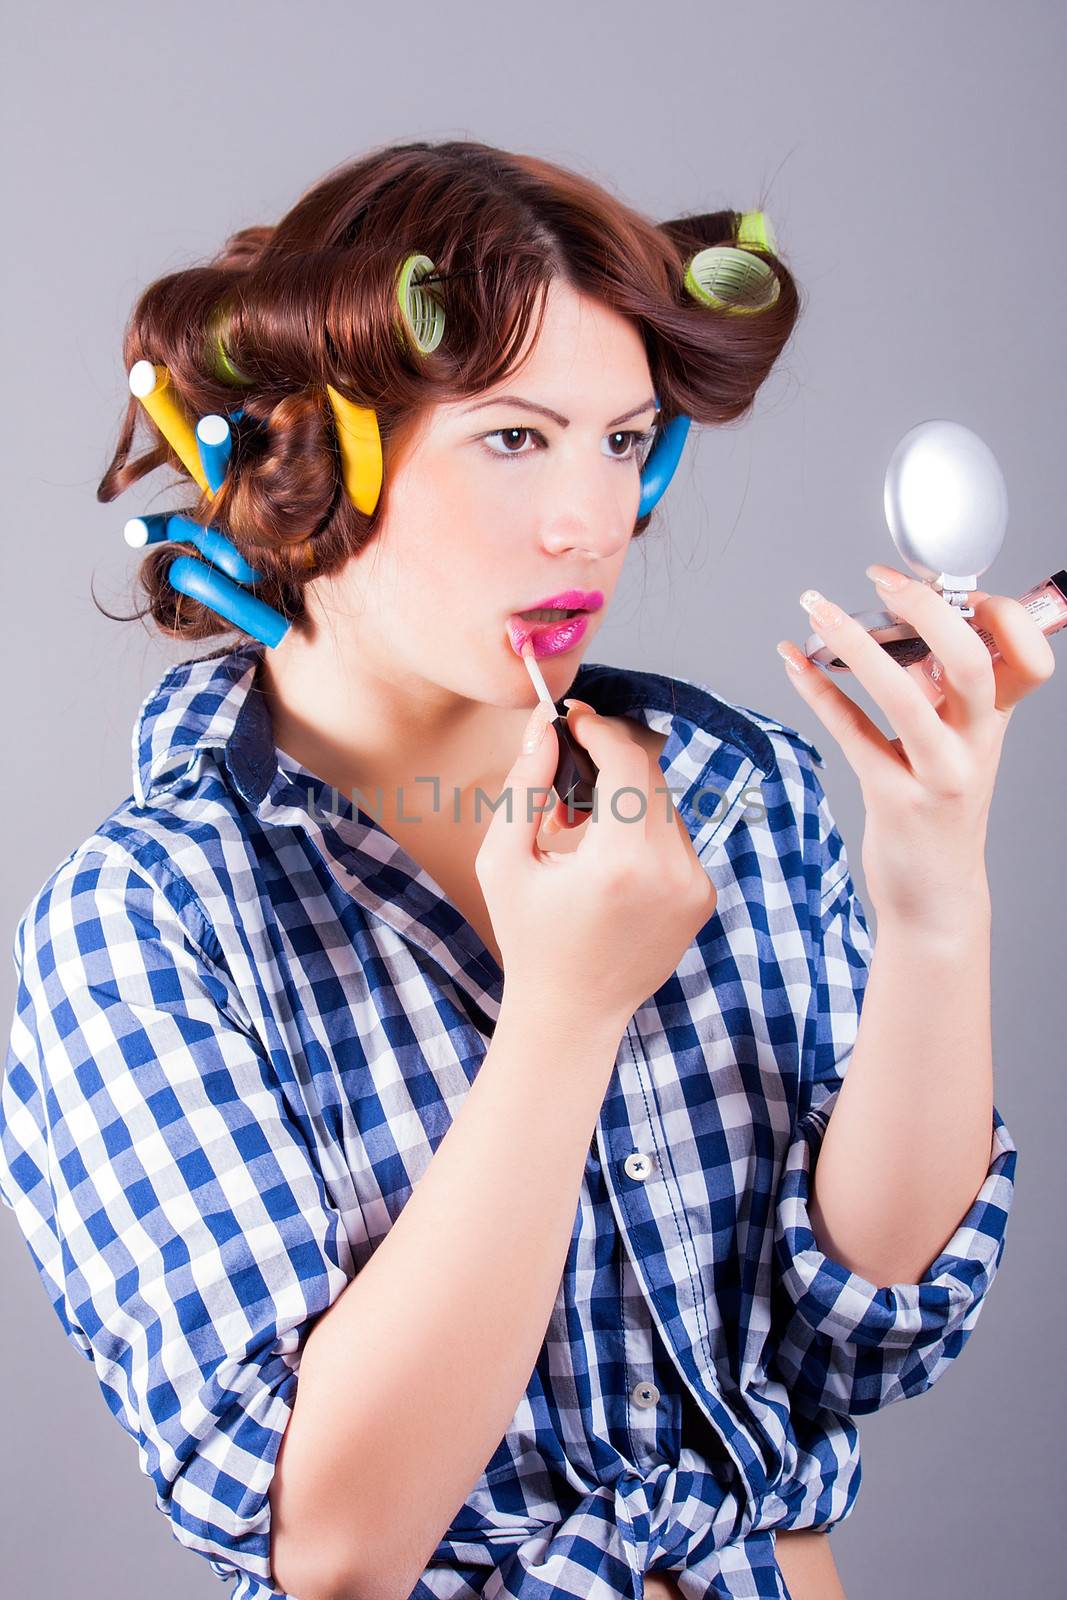 Woman with curlers applying make up by dukibu